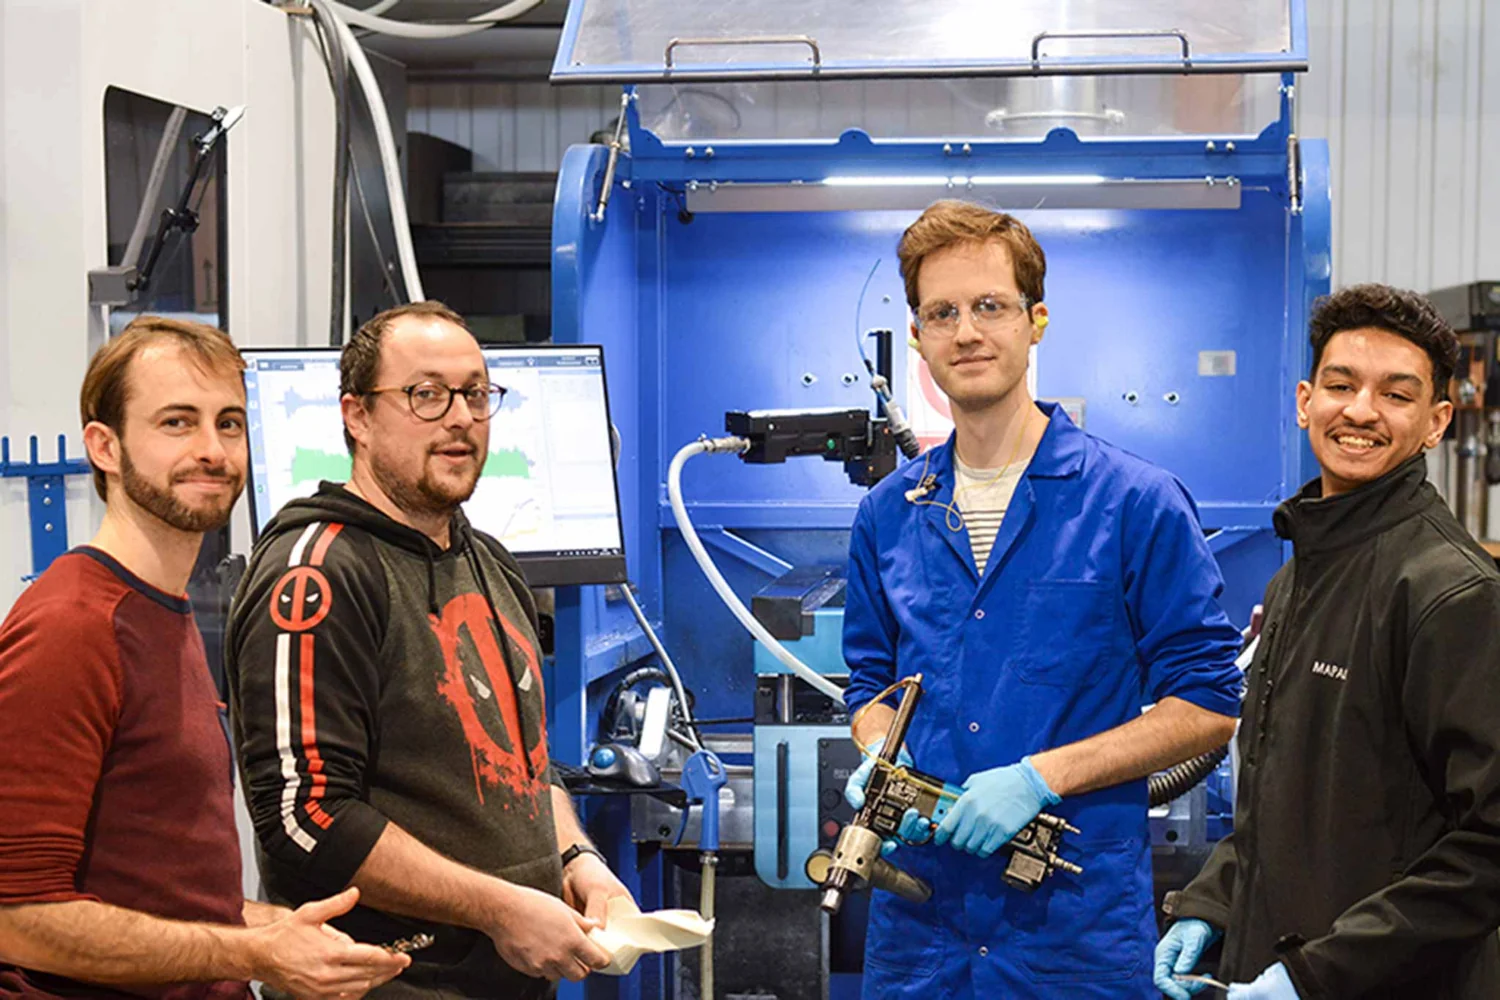 Four men stand in a manufacturing environment. One has a hand drill in his hand.